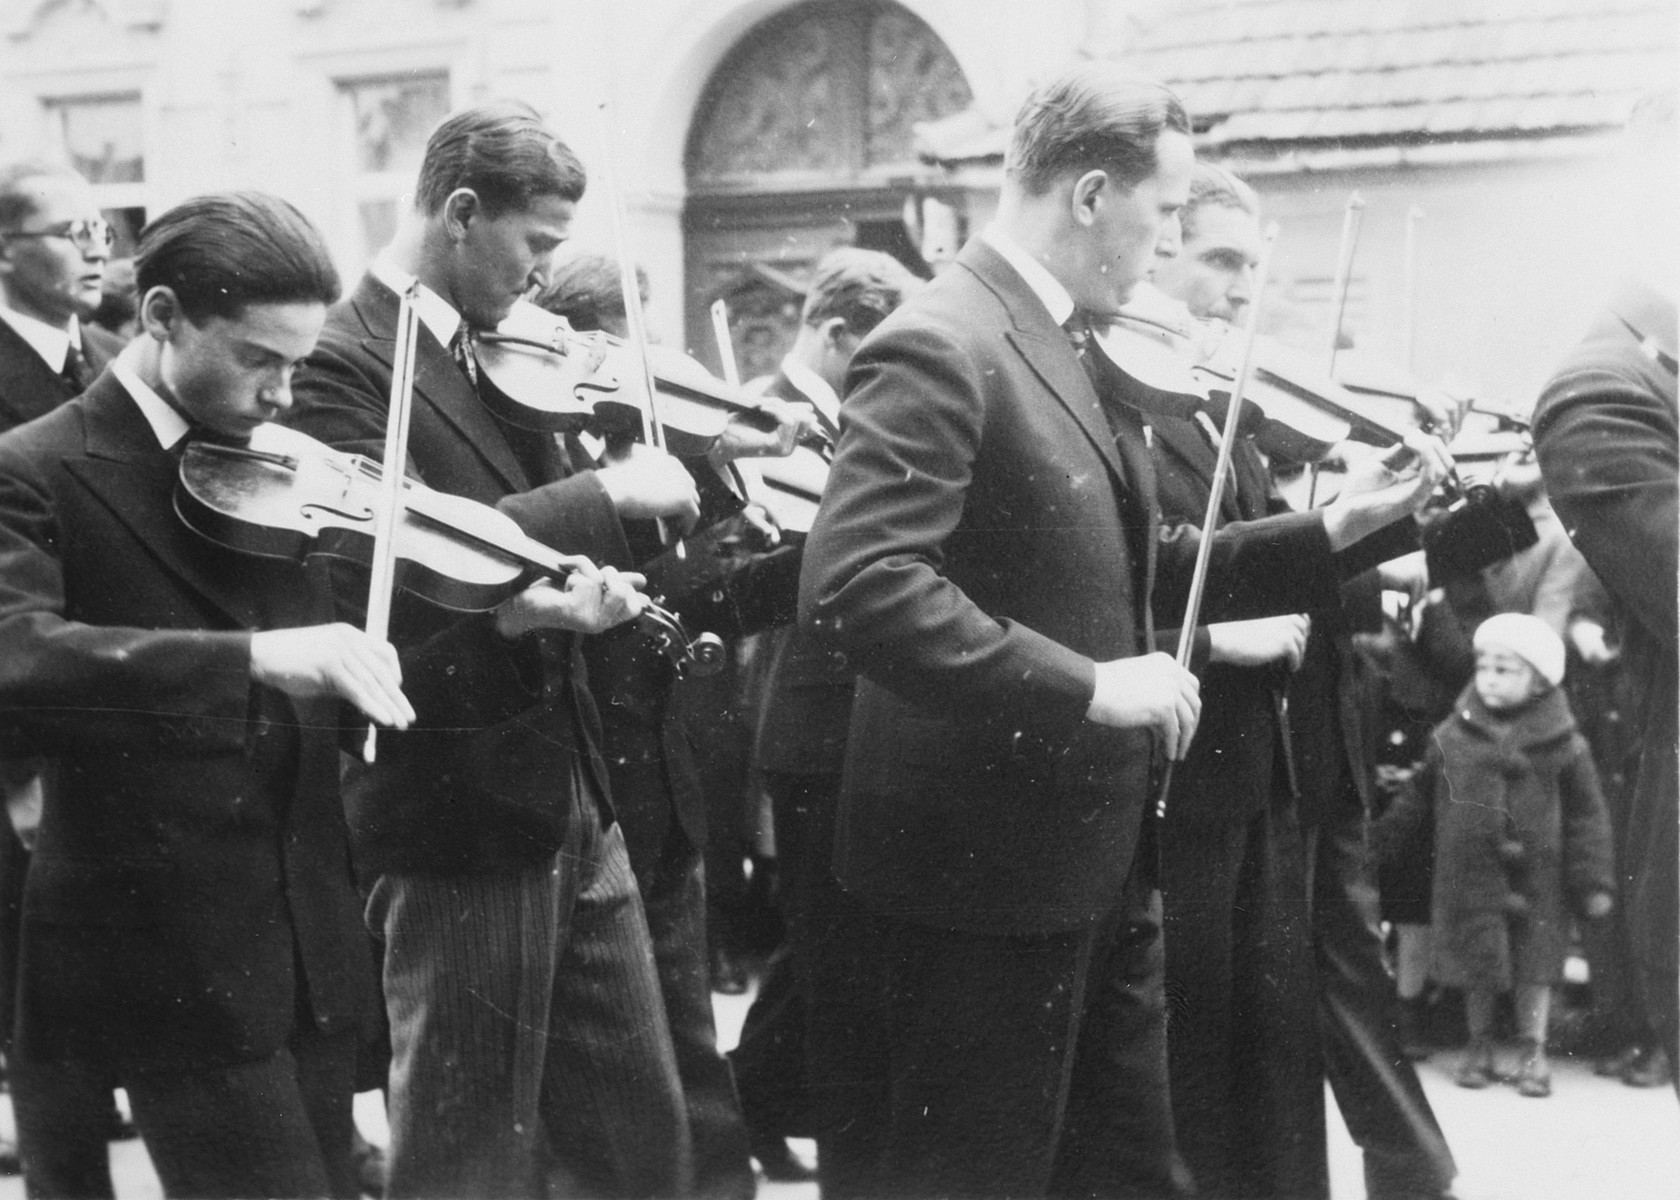 Graduates of a Gymnasium in Budapest parade to the commencement excercises playing the violin.

Among those pictured is Denes Simonyi (left), one of three Jewish students.